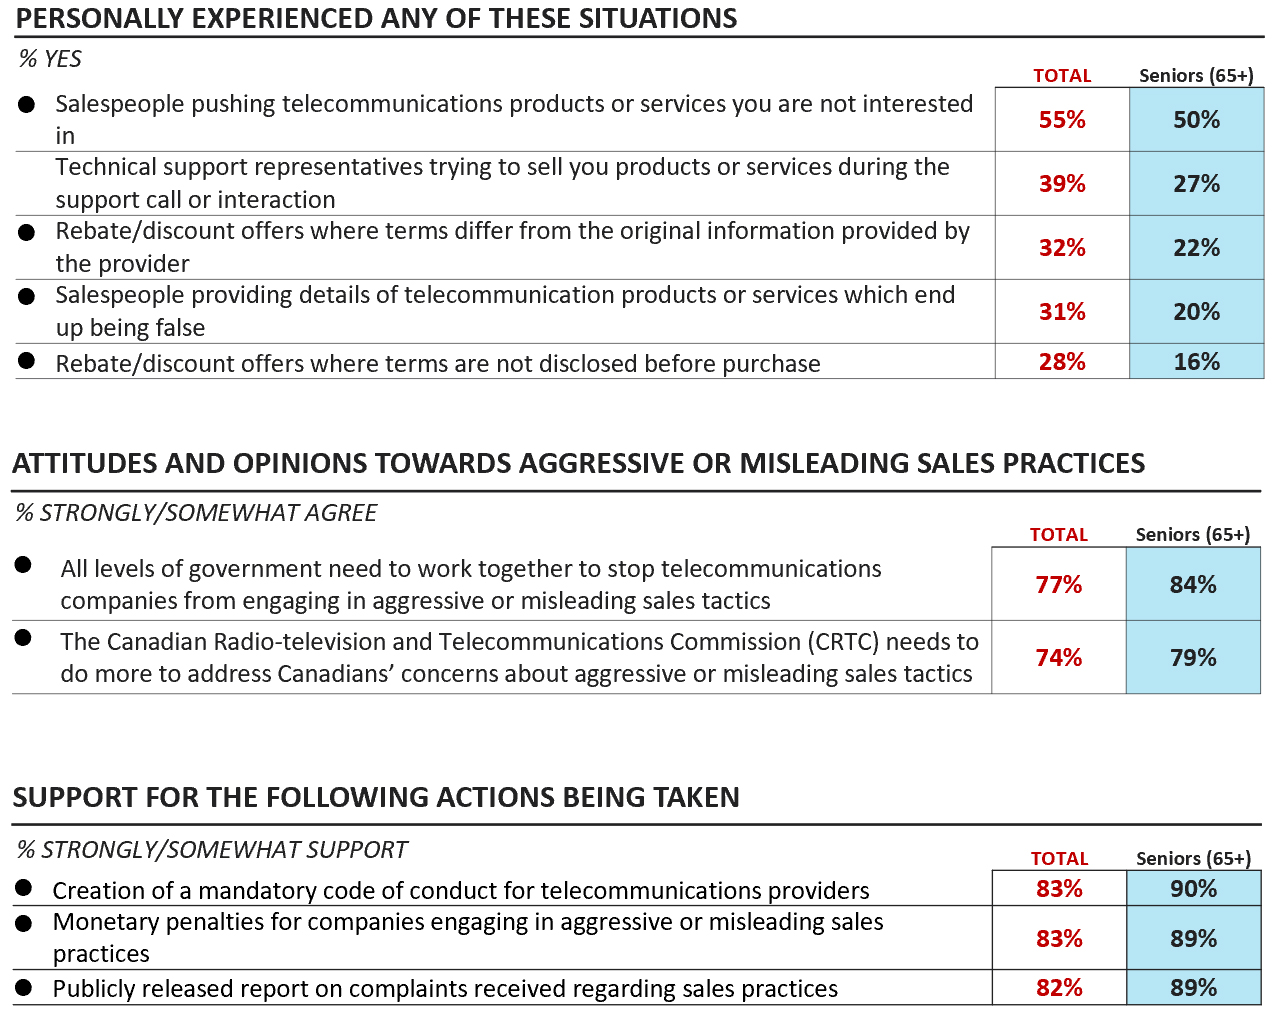 Figure 19: Differences in experience, attitudes and support for action among Seniors